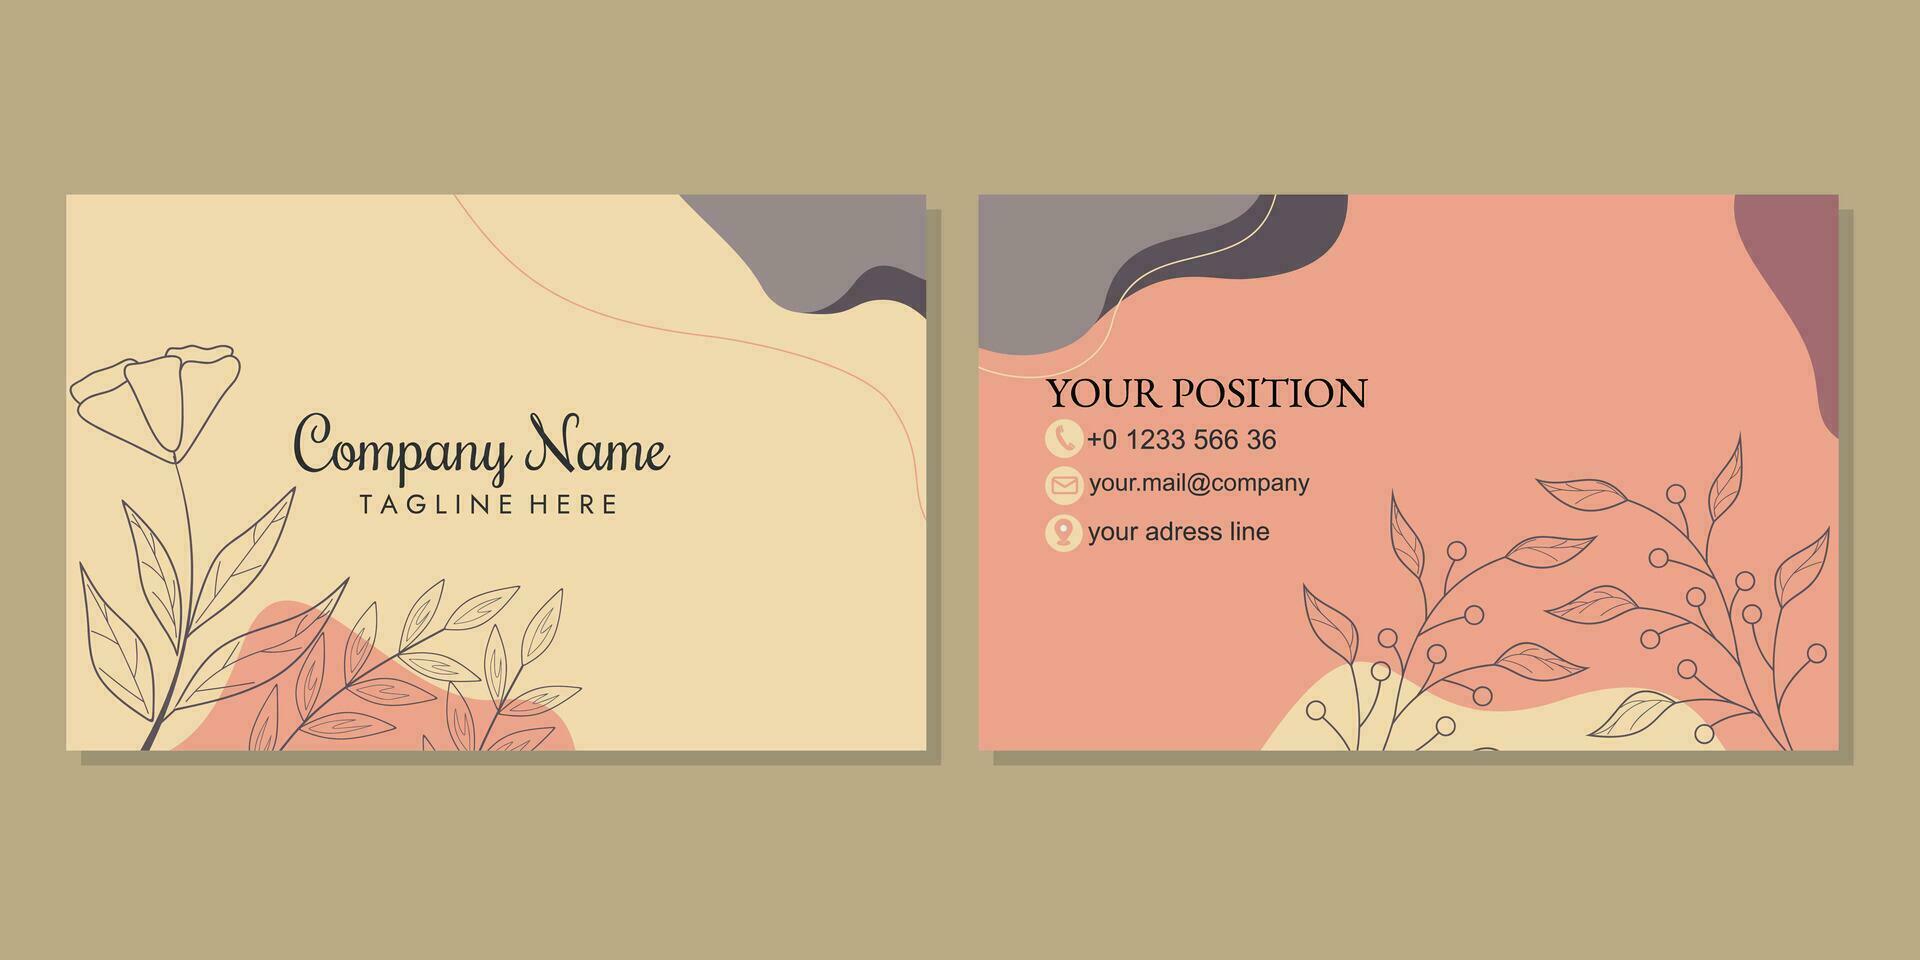 cute and beautiful business card template with hand drawn floral pattern. landscape orientation for identity cards, business card, thank you cards, covers, invitations. vector